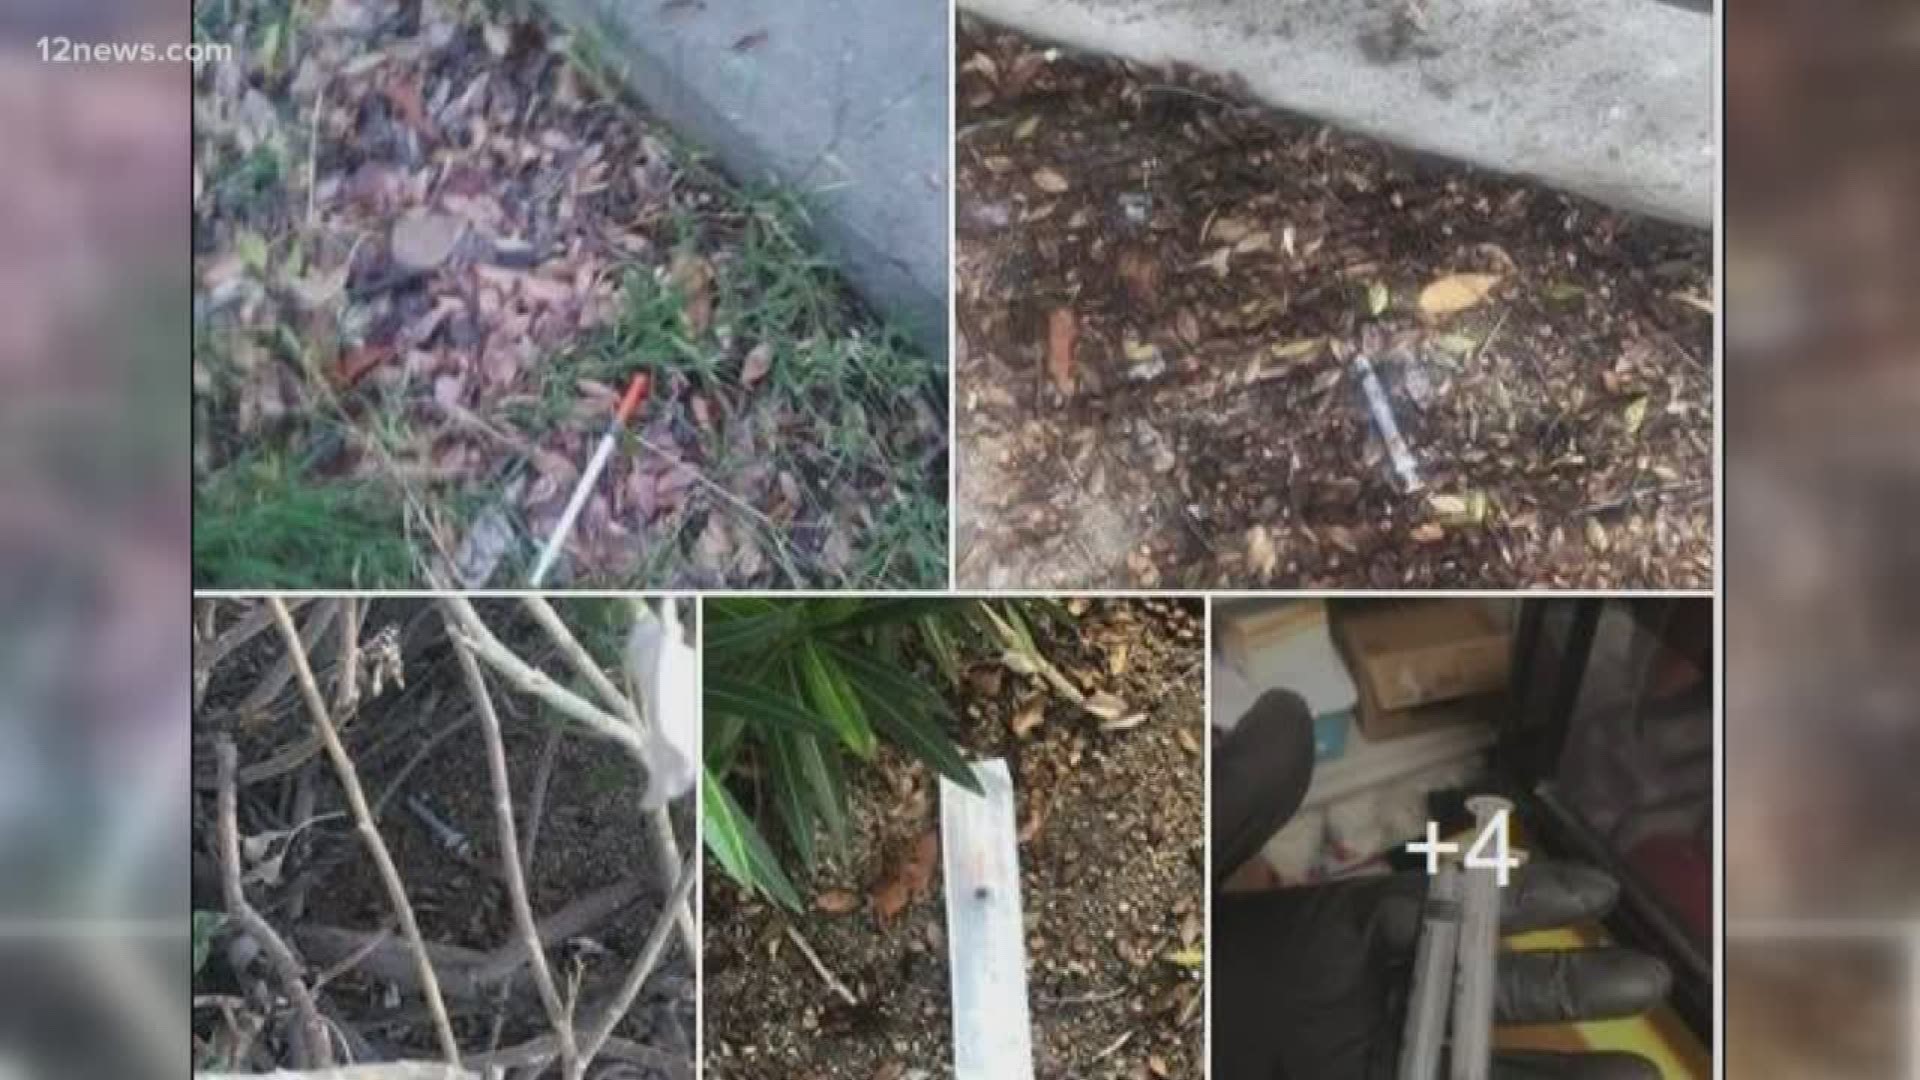 A Facebook post shows photos of syringes on the ground at Washington Elementary School in northwest Phoenix. The principal wouldn't confirm the needles.